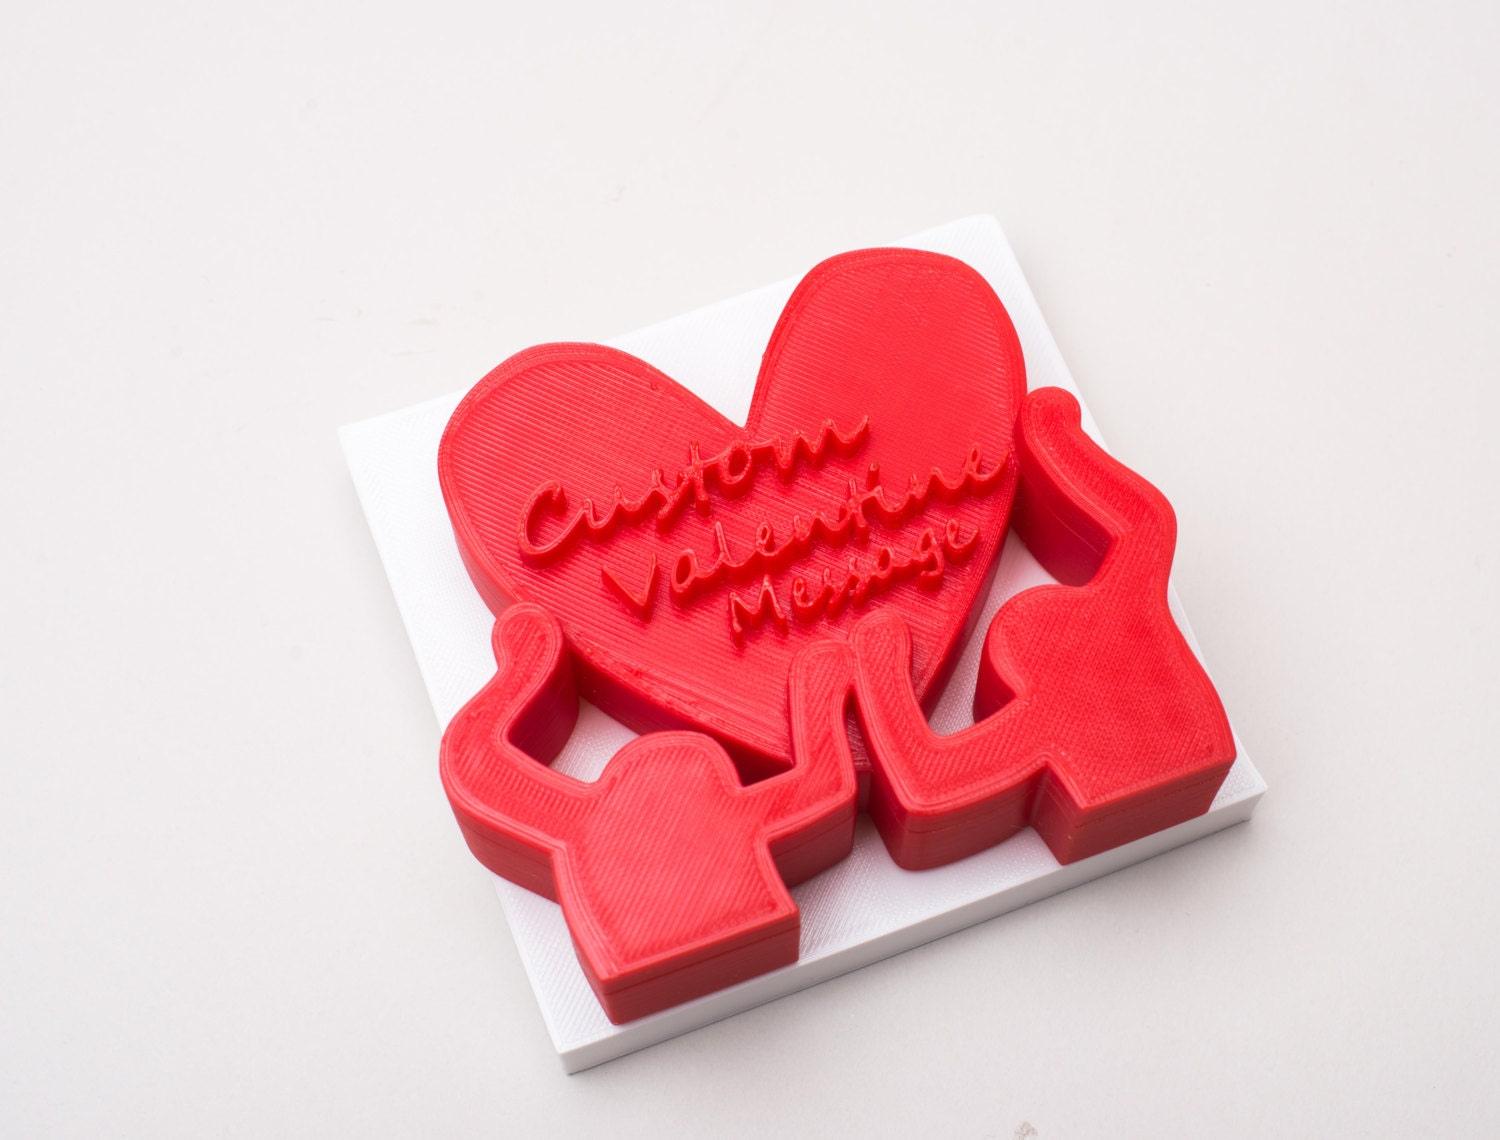 Personalized 3D Printed Raising Heart , Wedding, Christmas, Pride, Love, Personalized Gift, Keith Haring, Anniversary Gift - Meow3D